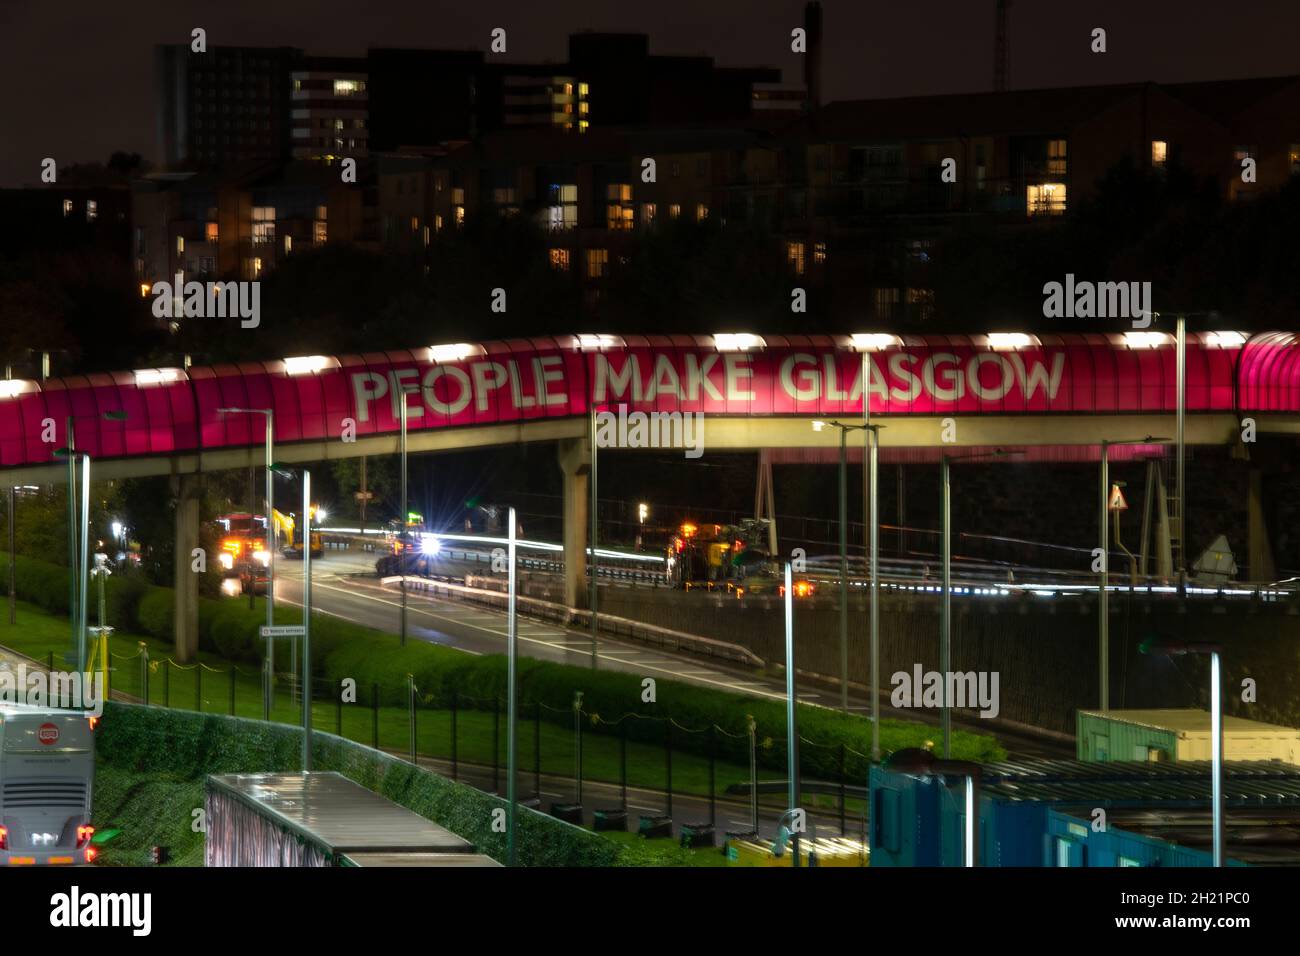 Glasgow, Scotland, UK. 19th Oct, 2021. PICTURED: People Make Glasgow walkway over the Clydeside expressway. Night views of the COP26 site and venue showing temporary structures half built on the grounds of the Scottish Event Campus (SEC) Previously known as Scottish Exhibition and Conference Centre (SECC) with the front car park outside of the newly named The OVO Hydro (formerly SSE Hydro) with new transfers over the walkway which says “People Make Glasgow” and night workers continue making preparations. Credit: Colin Fisher/Alamy Live News Stock Photo